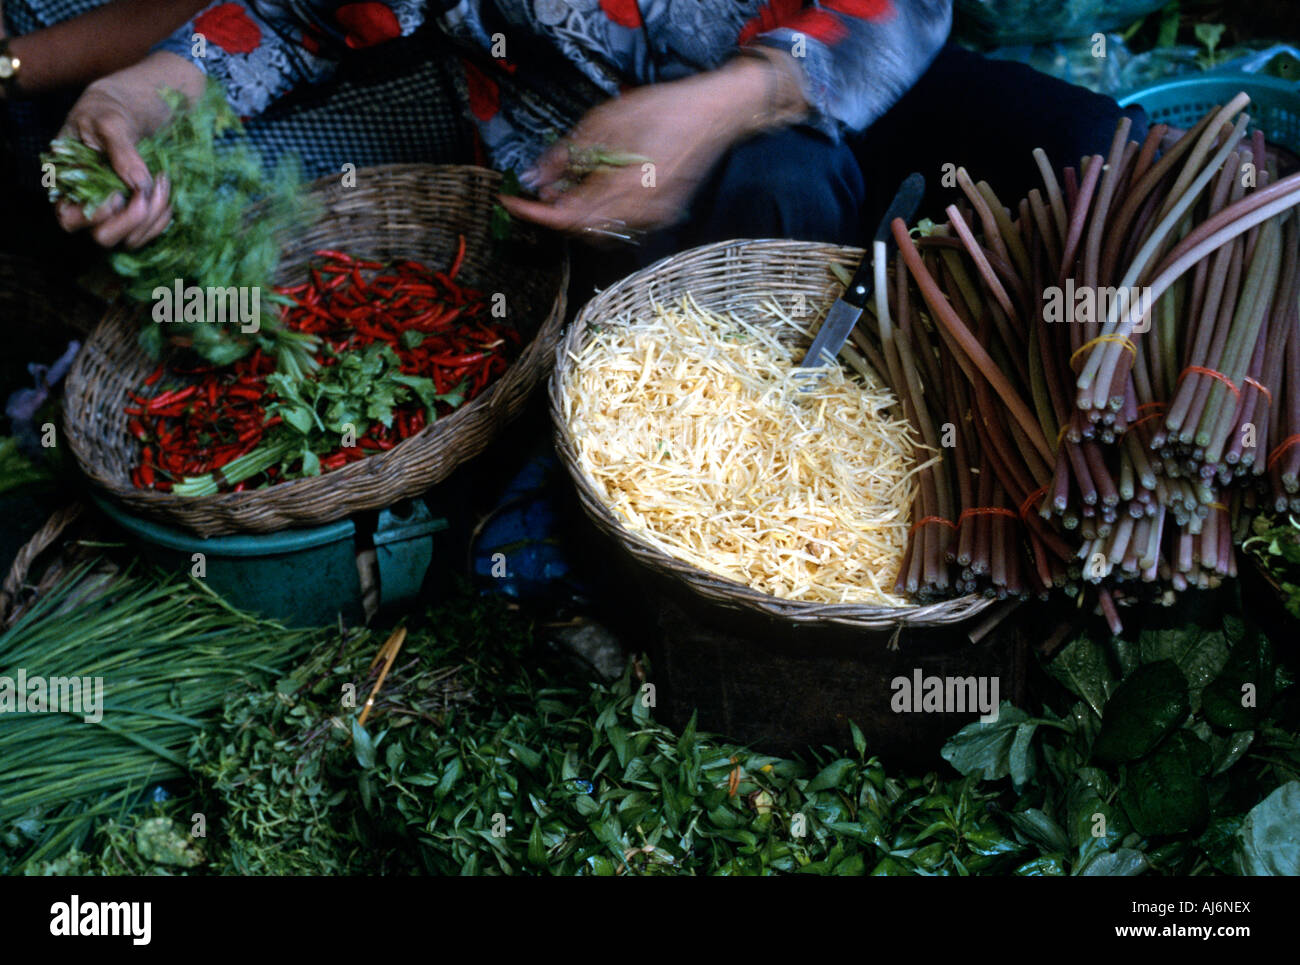 Food and vegetables for sale at a wet market in Phnom Penh, Cambodia. Stock Photo